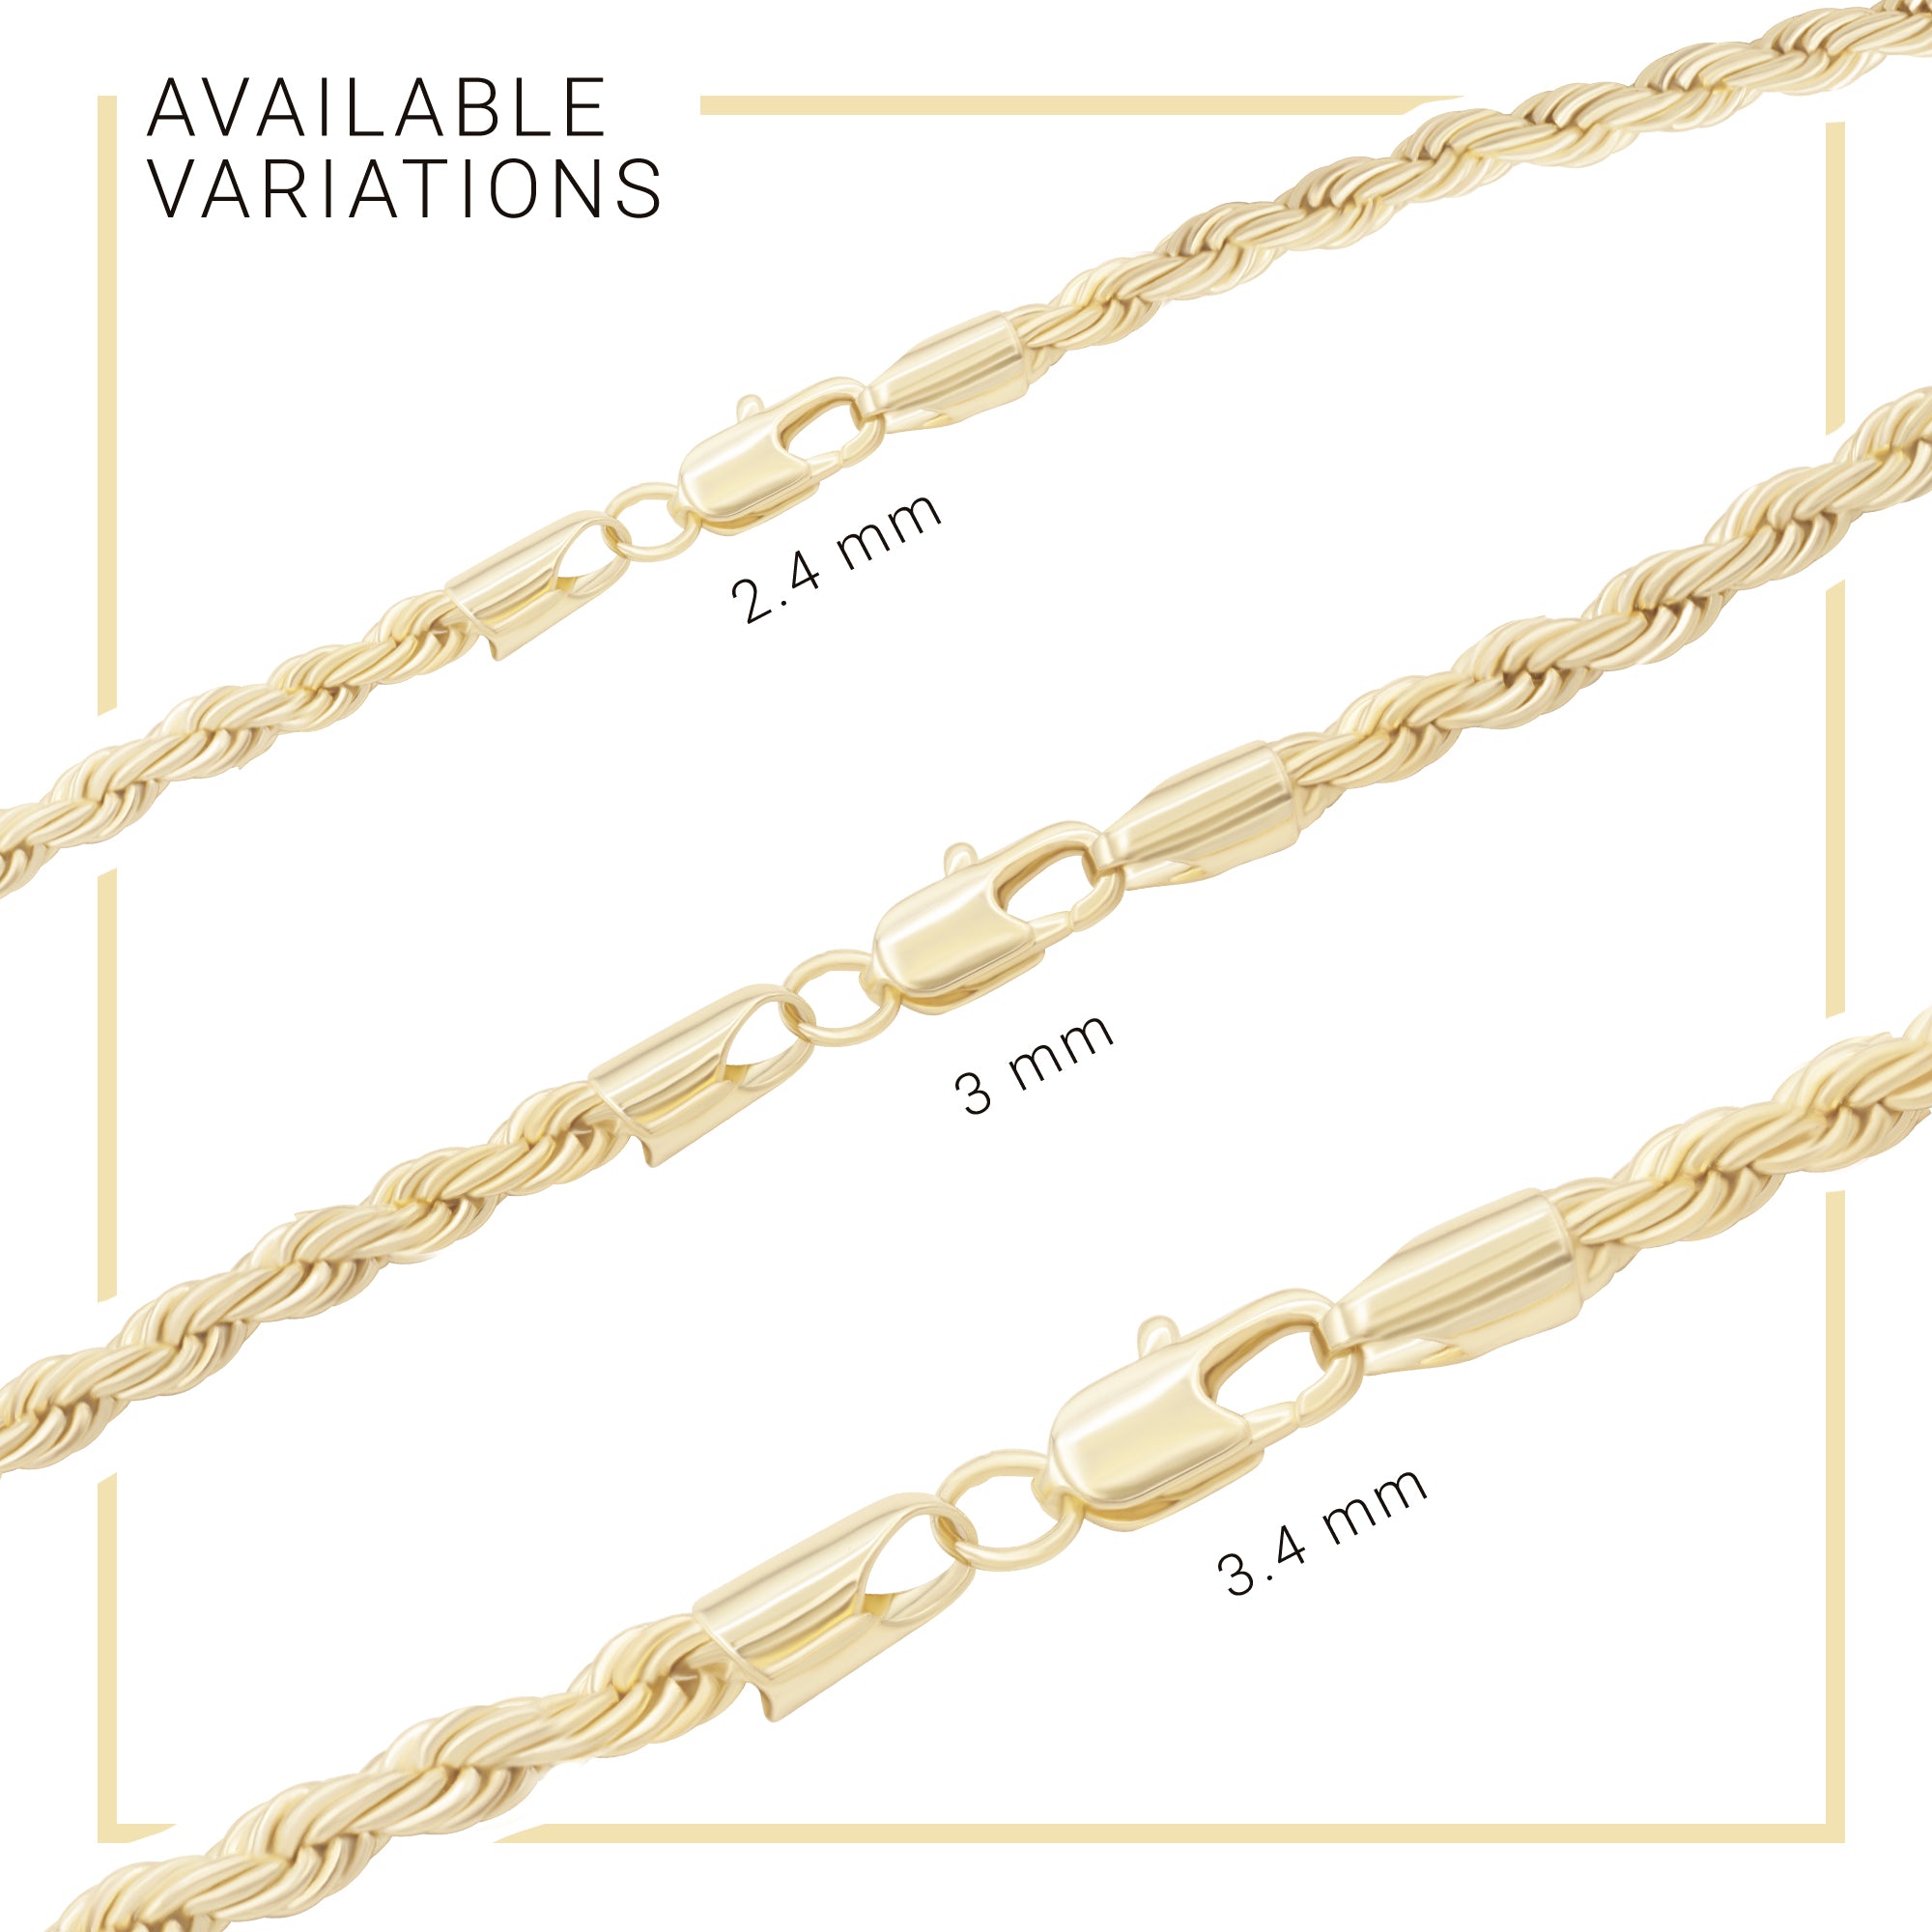 14K Gold Filled Anklet Rope Chain 9.5" Anklet Women Women Jewelry